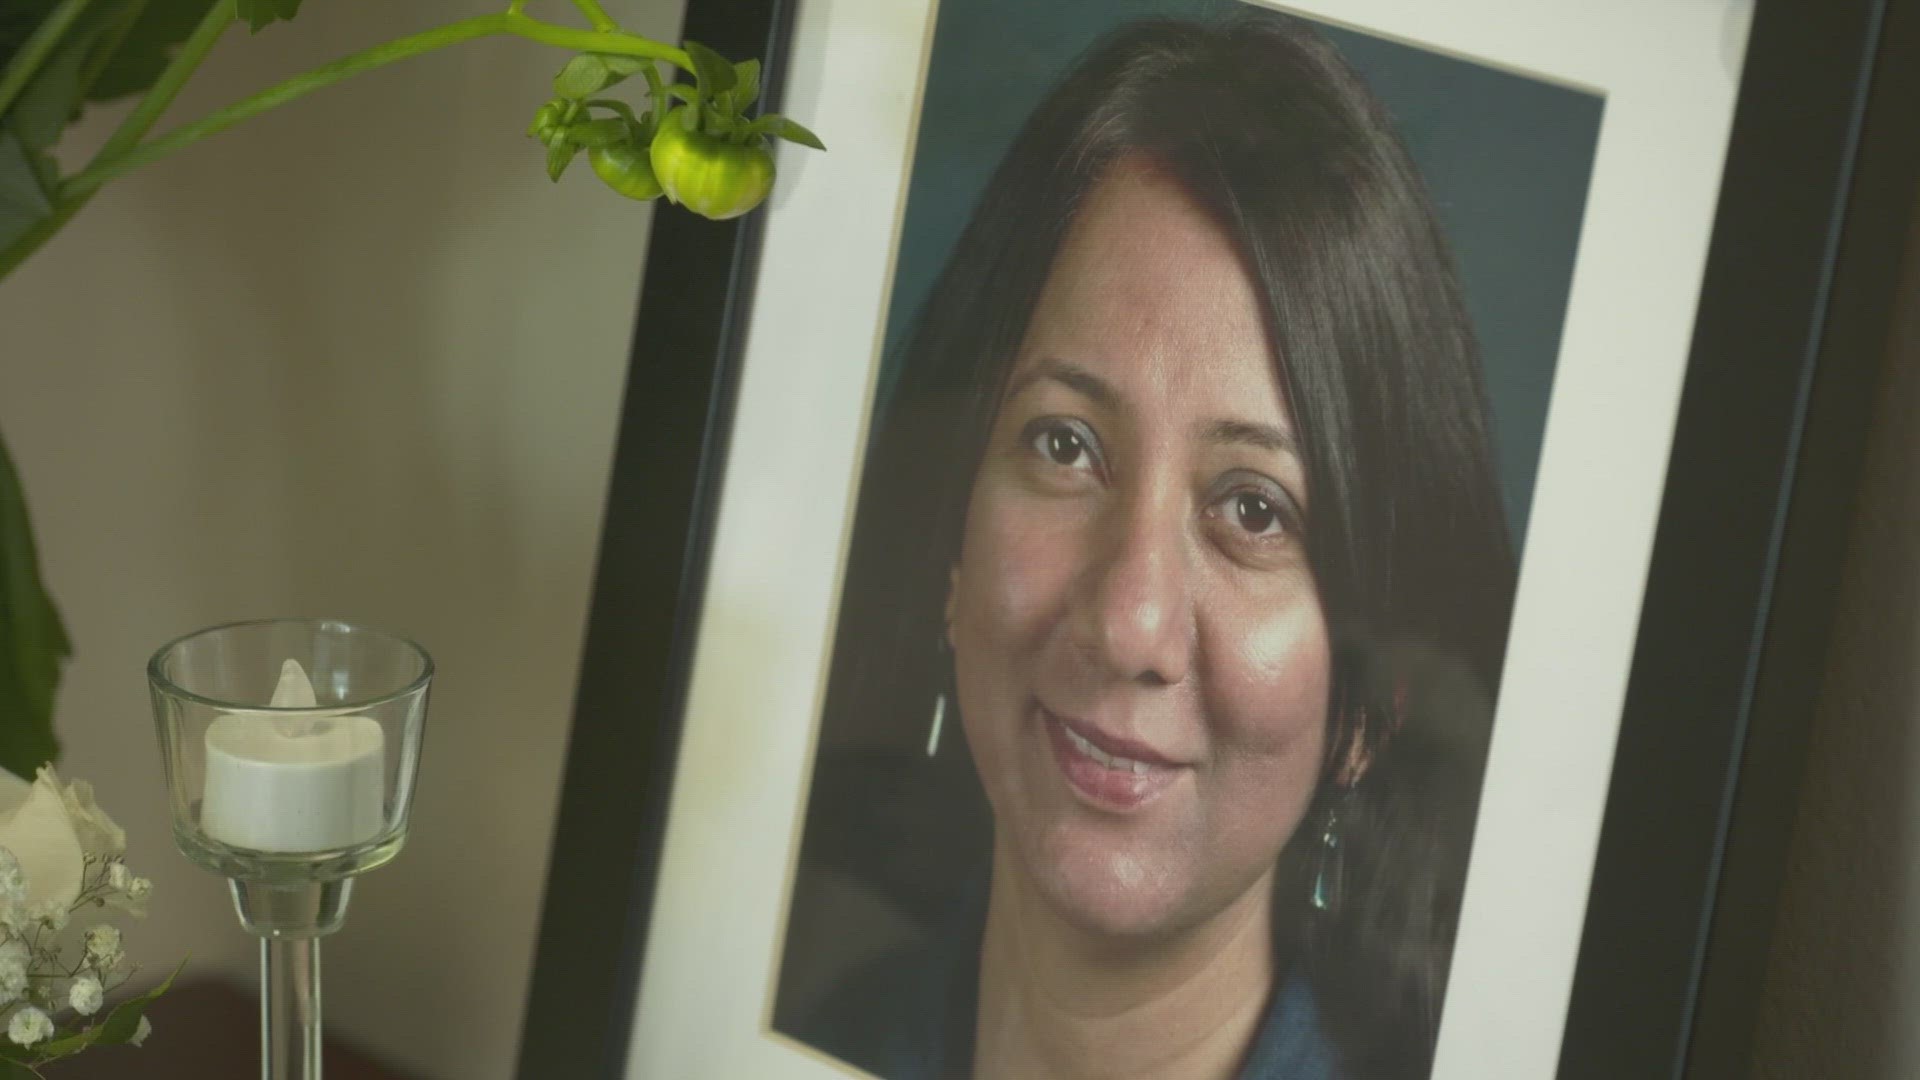 Dr. Talat Jehan Khan, a pediatrician who moved from Seattle to the Houston area months ago, was loved by her family members as well as her hundreds of patients.